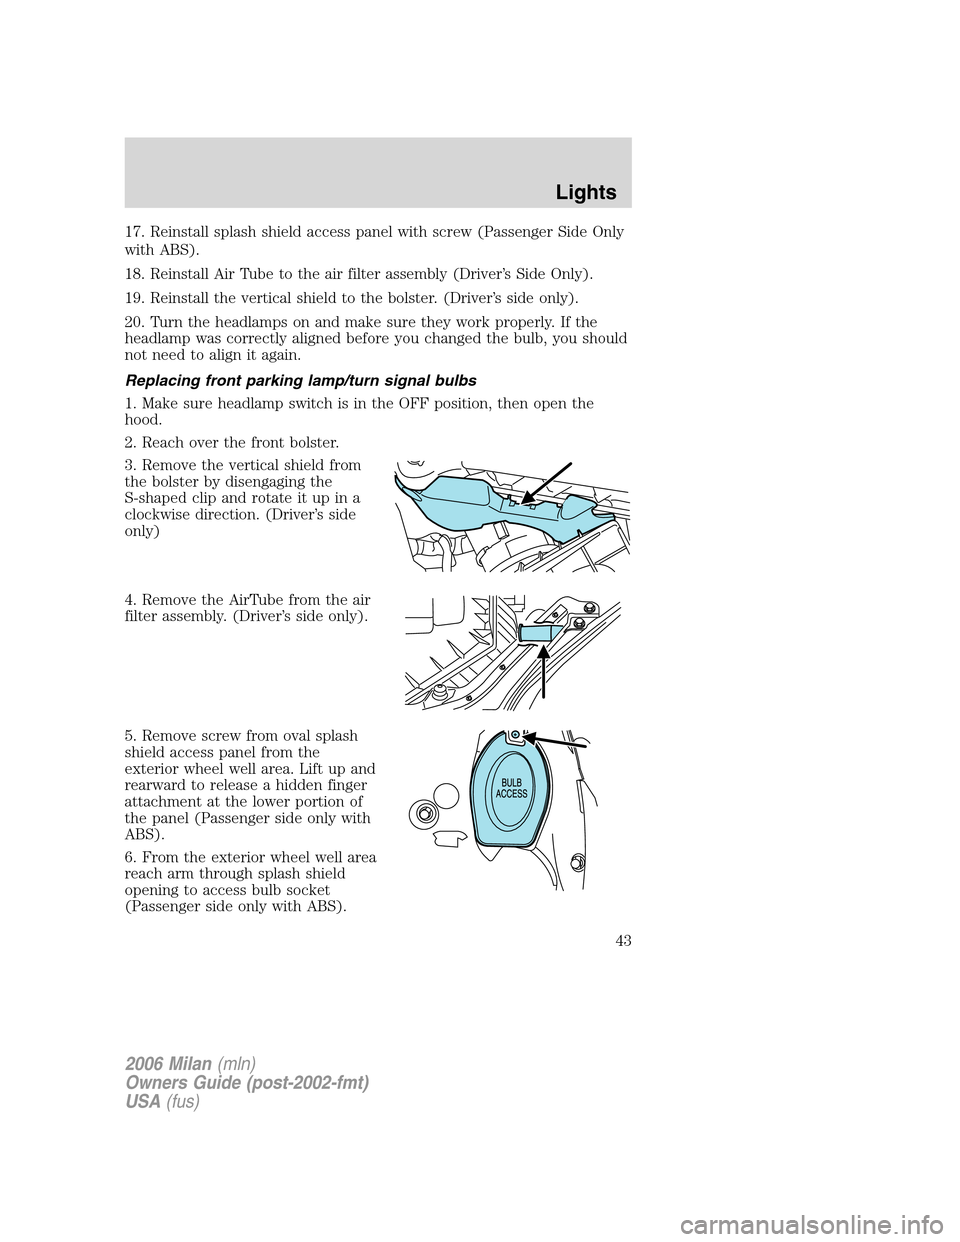 Mercury Milan 2006  s Service Manual 17. Reinstall splash shield access panel with screw (Passenger Side Only
with ABS).
18. Reinstall Air Tube to the air filter assembly (Driver’s Side Only).
19. Reinstall the vertical shield to the b